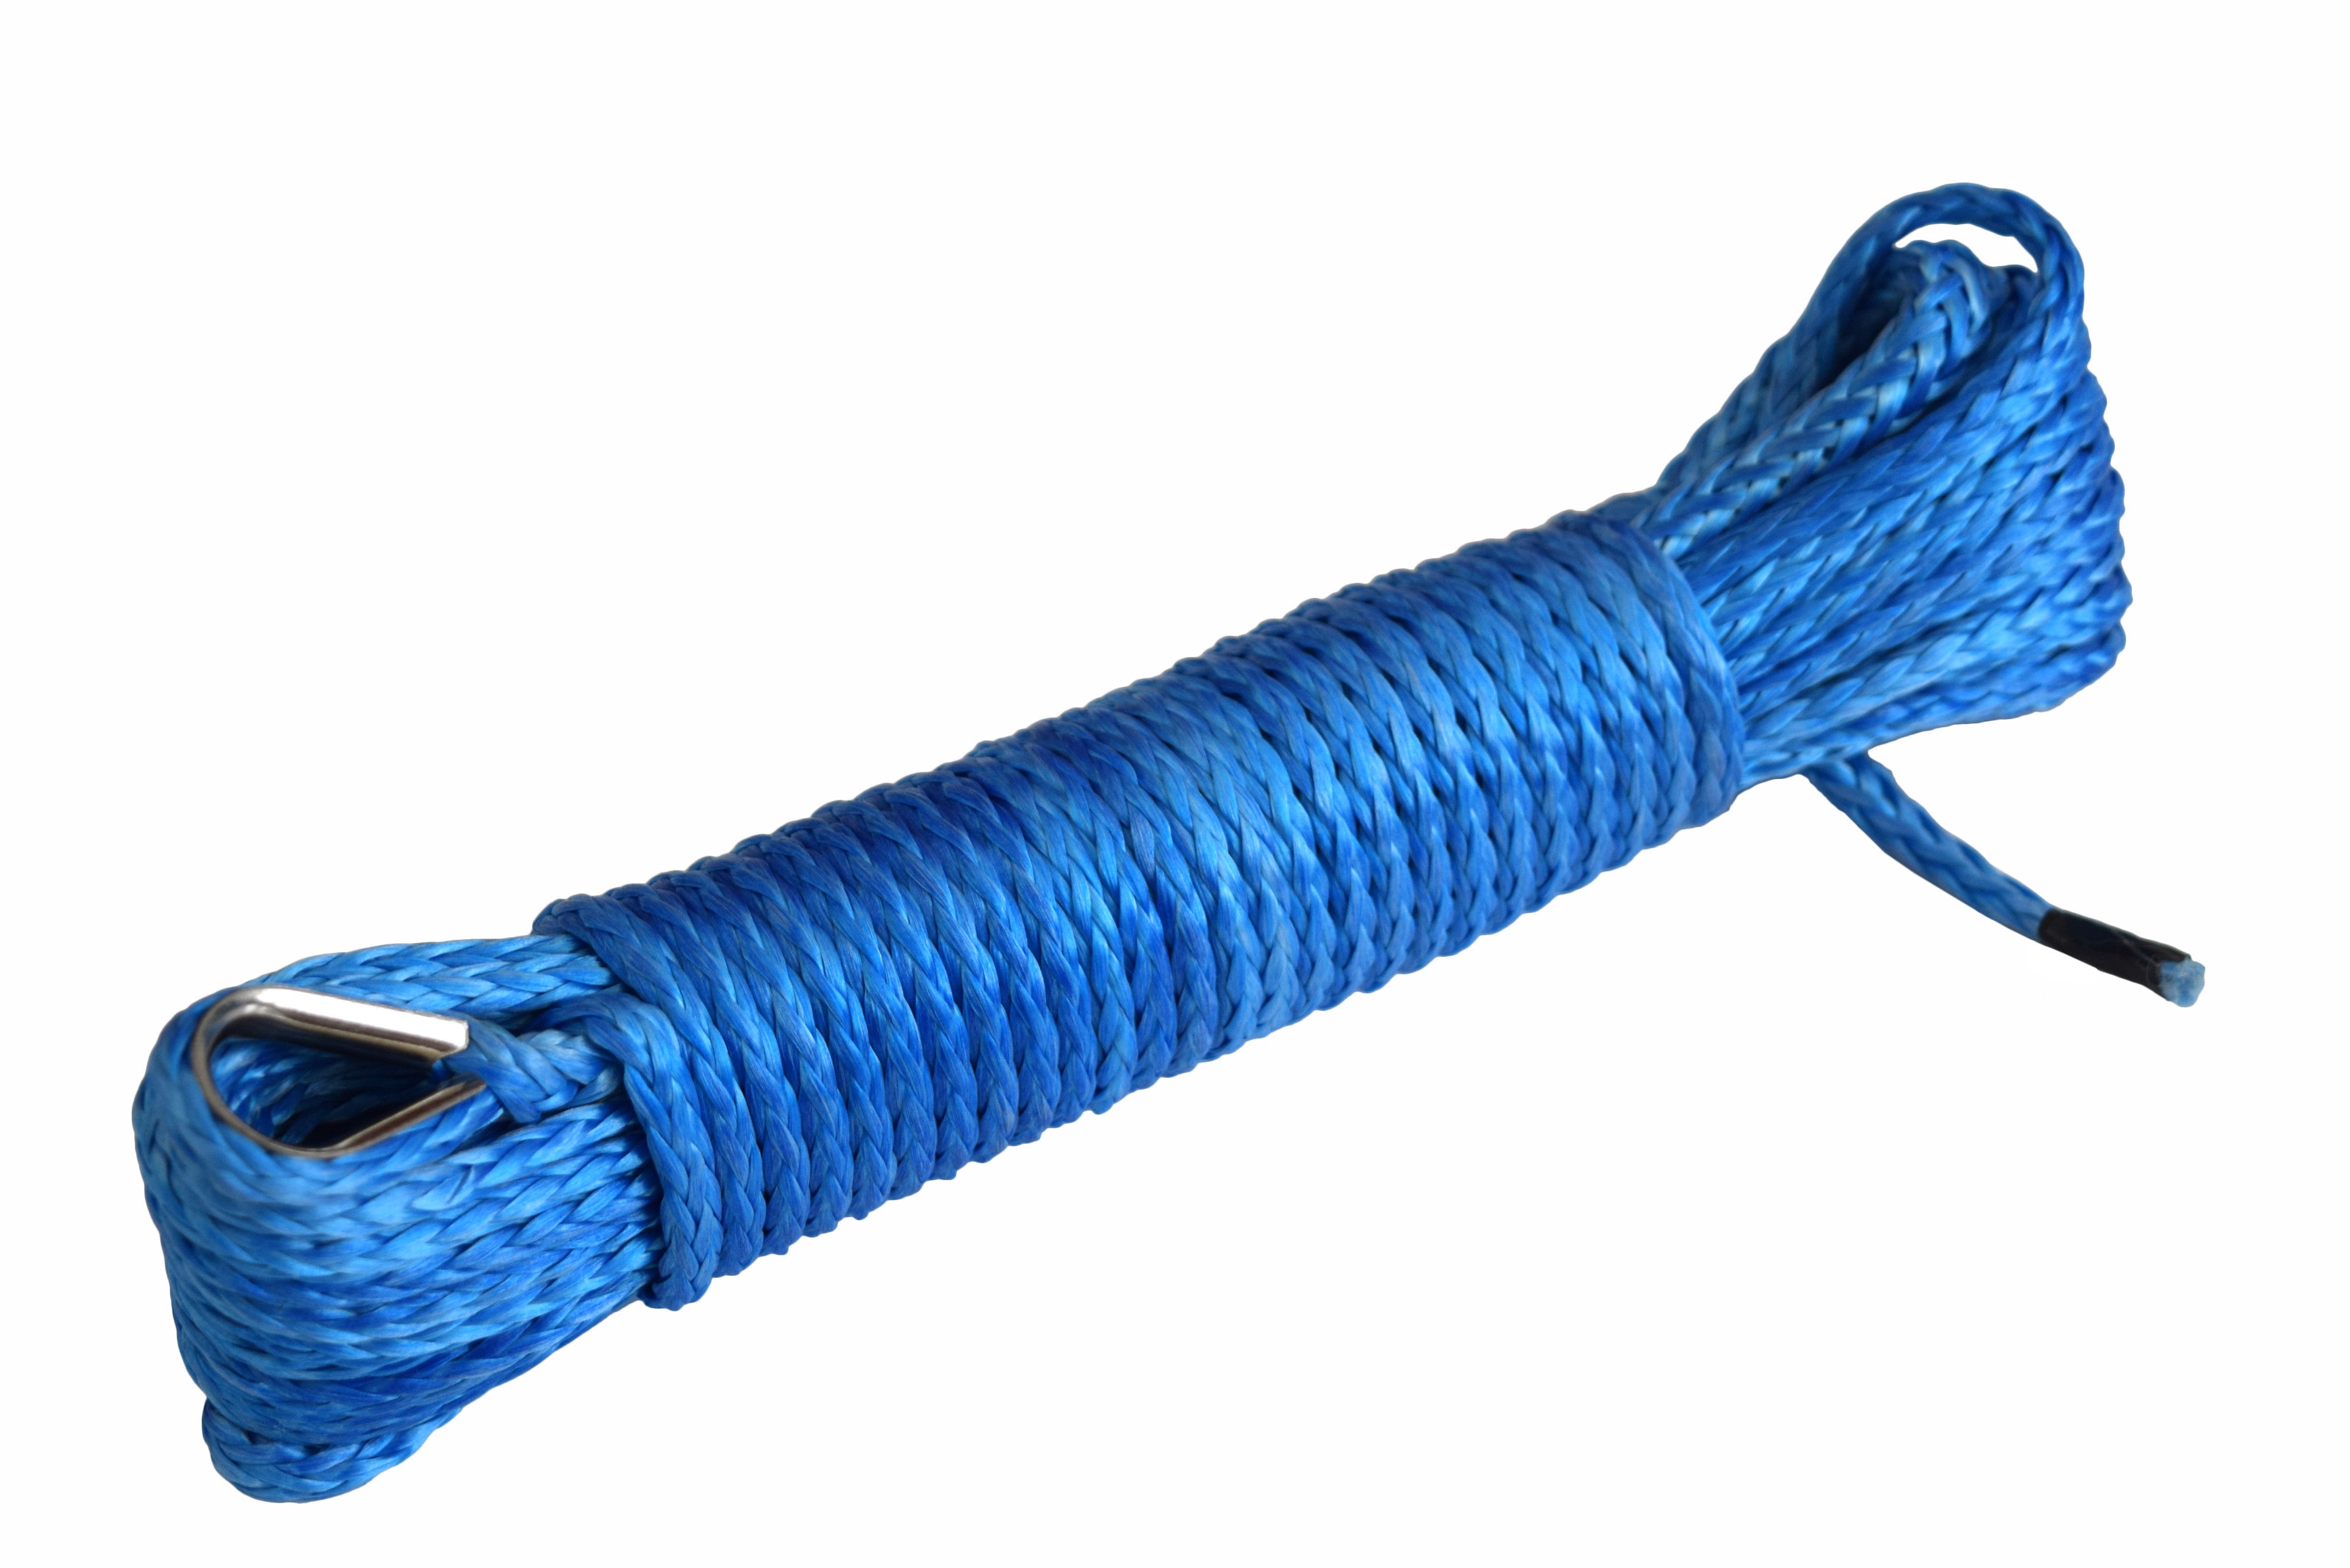 QIQU Blue 50 feet 3/16 inch ATV UTV synthetic winch cable rope line with thimble one end